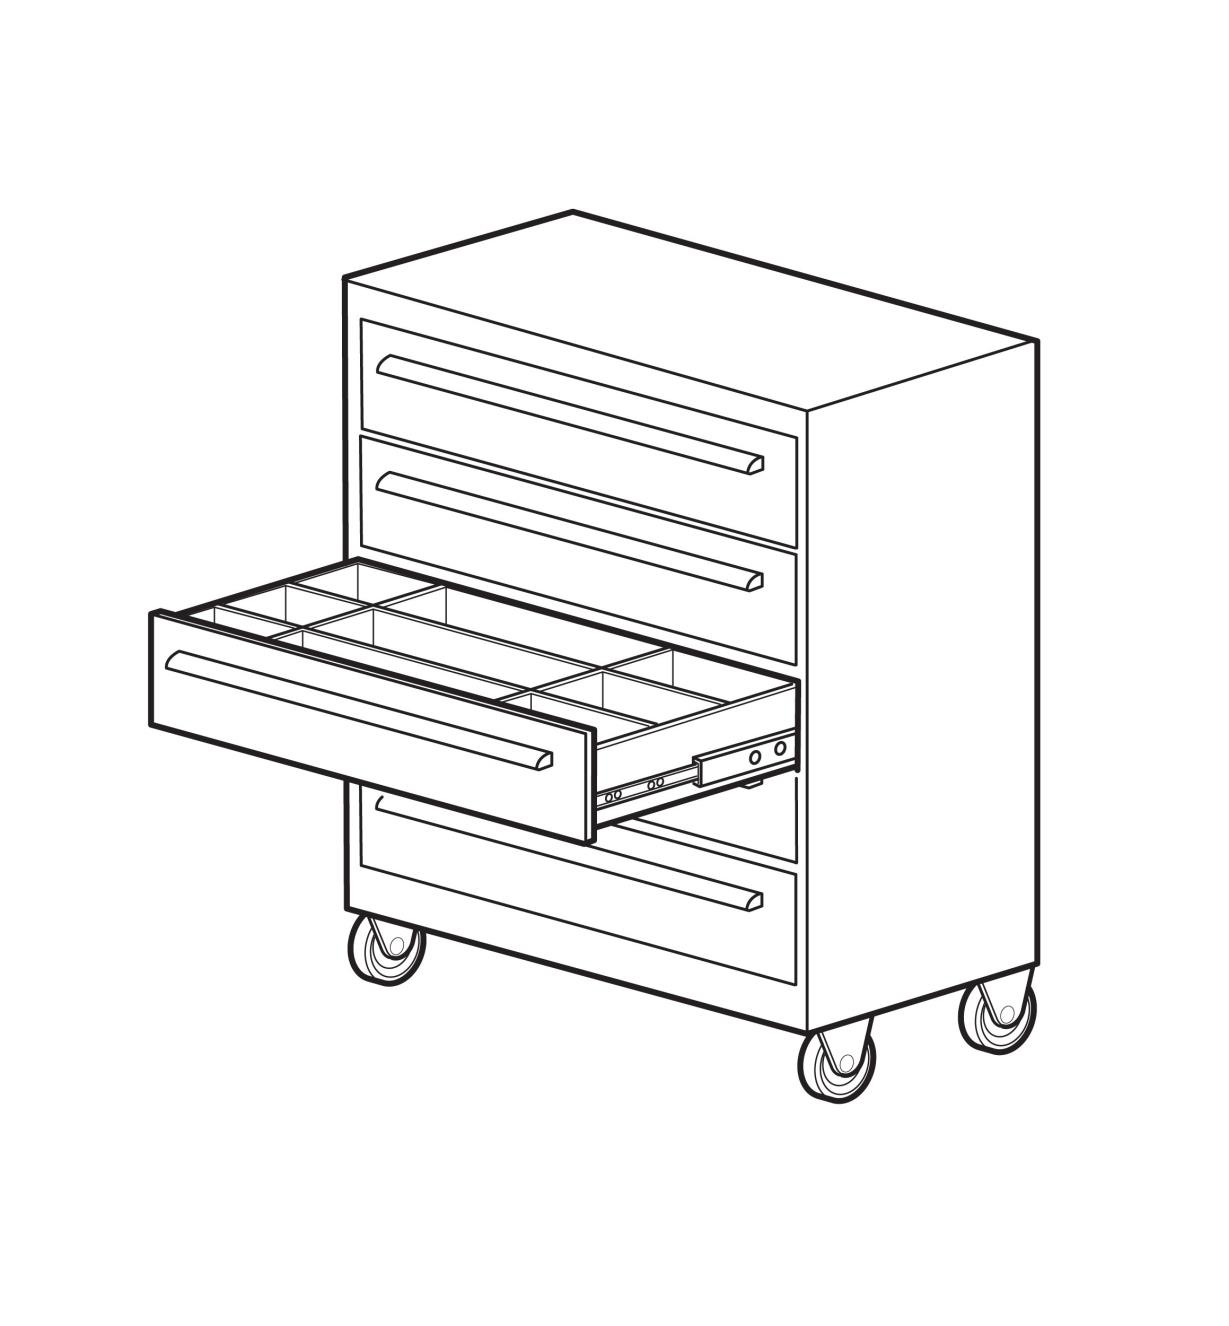 Illustration of Extra-Heavy-Duty Slides used in tool cabinet